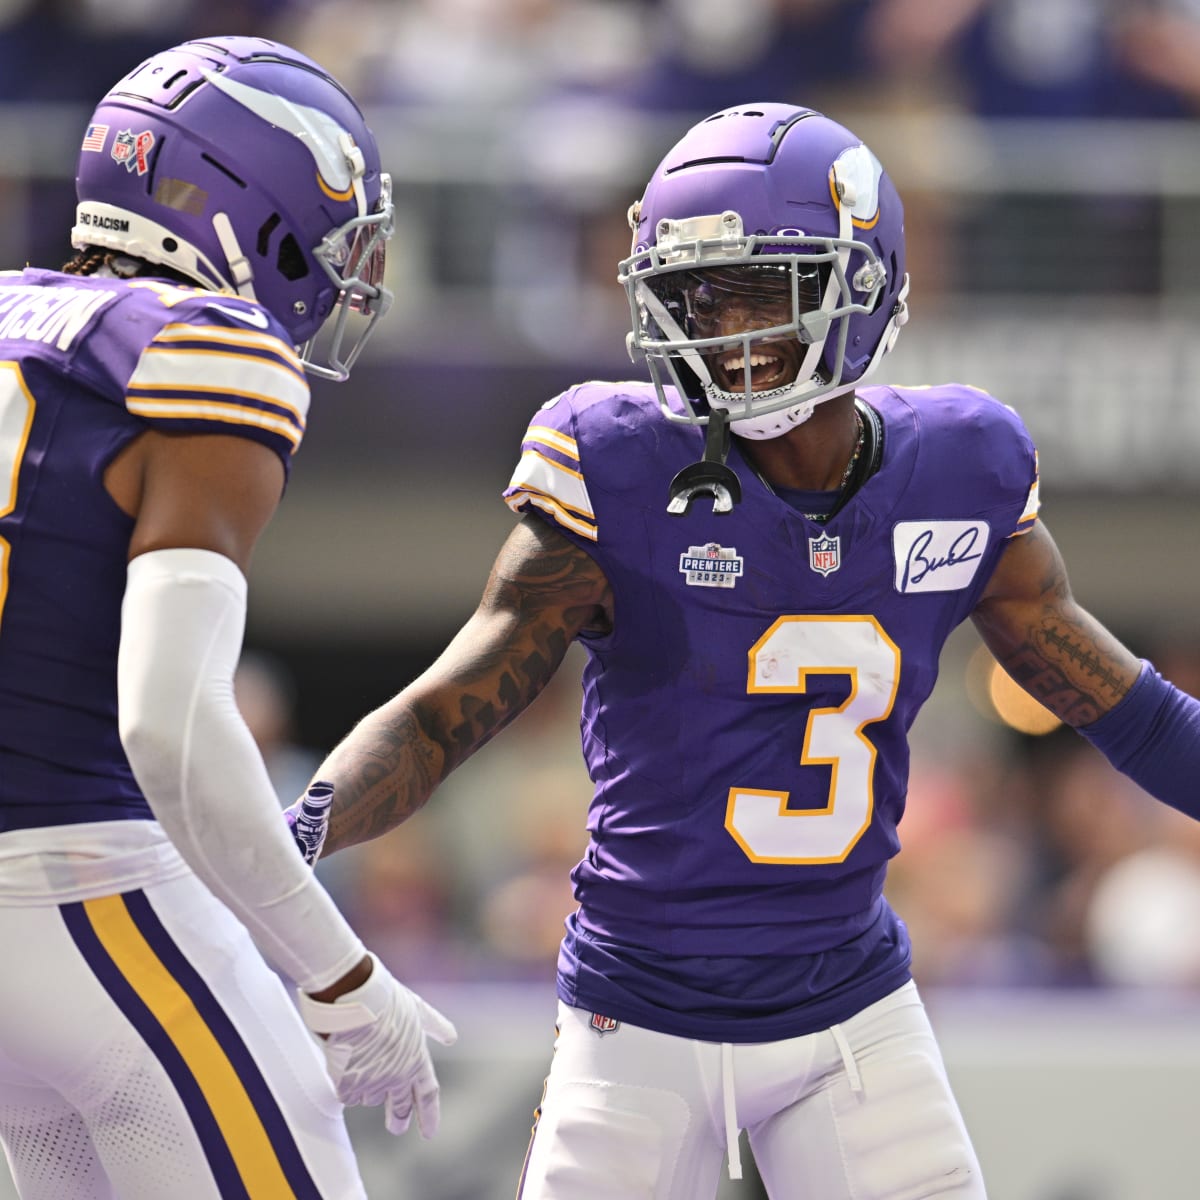 Bucs Gallery: Shots from the Bucs' win over the Vikings